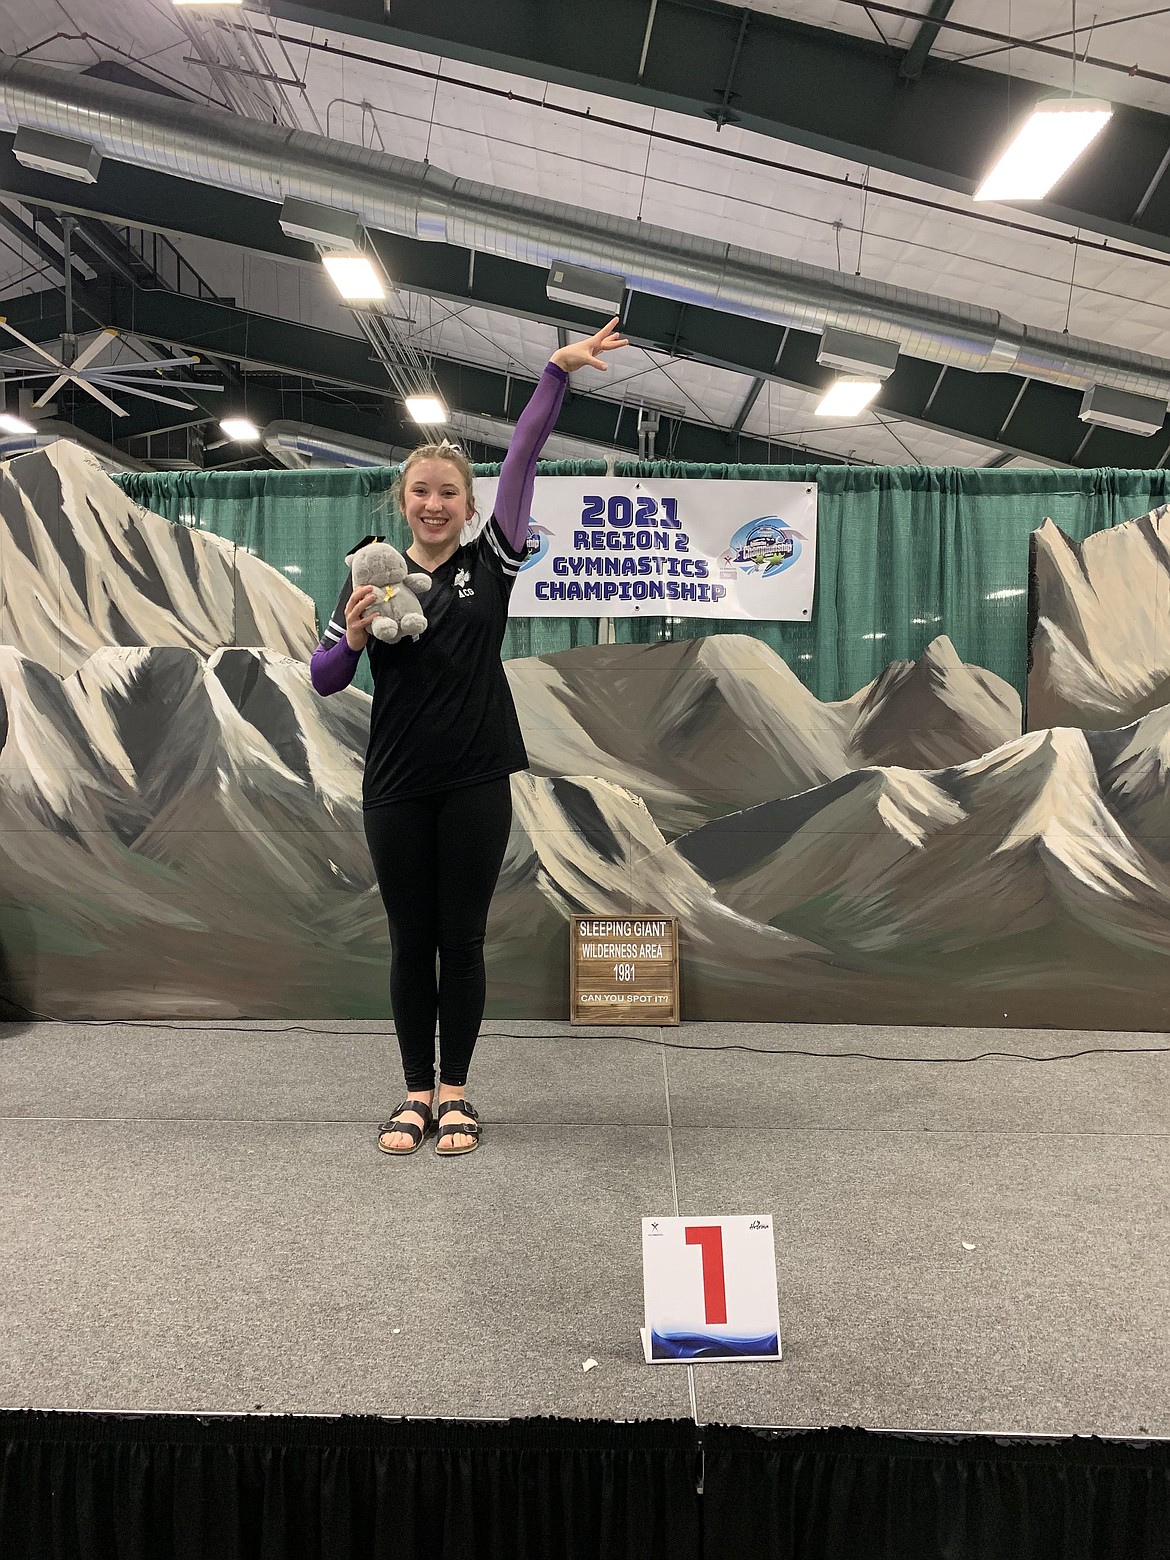 Courtesy photo
Avant Coeur Gymnastics Level 10 Senior Sam Snow competed in her last regional championships in Helena, Mont., this past weekend.